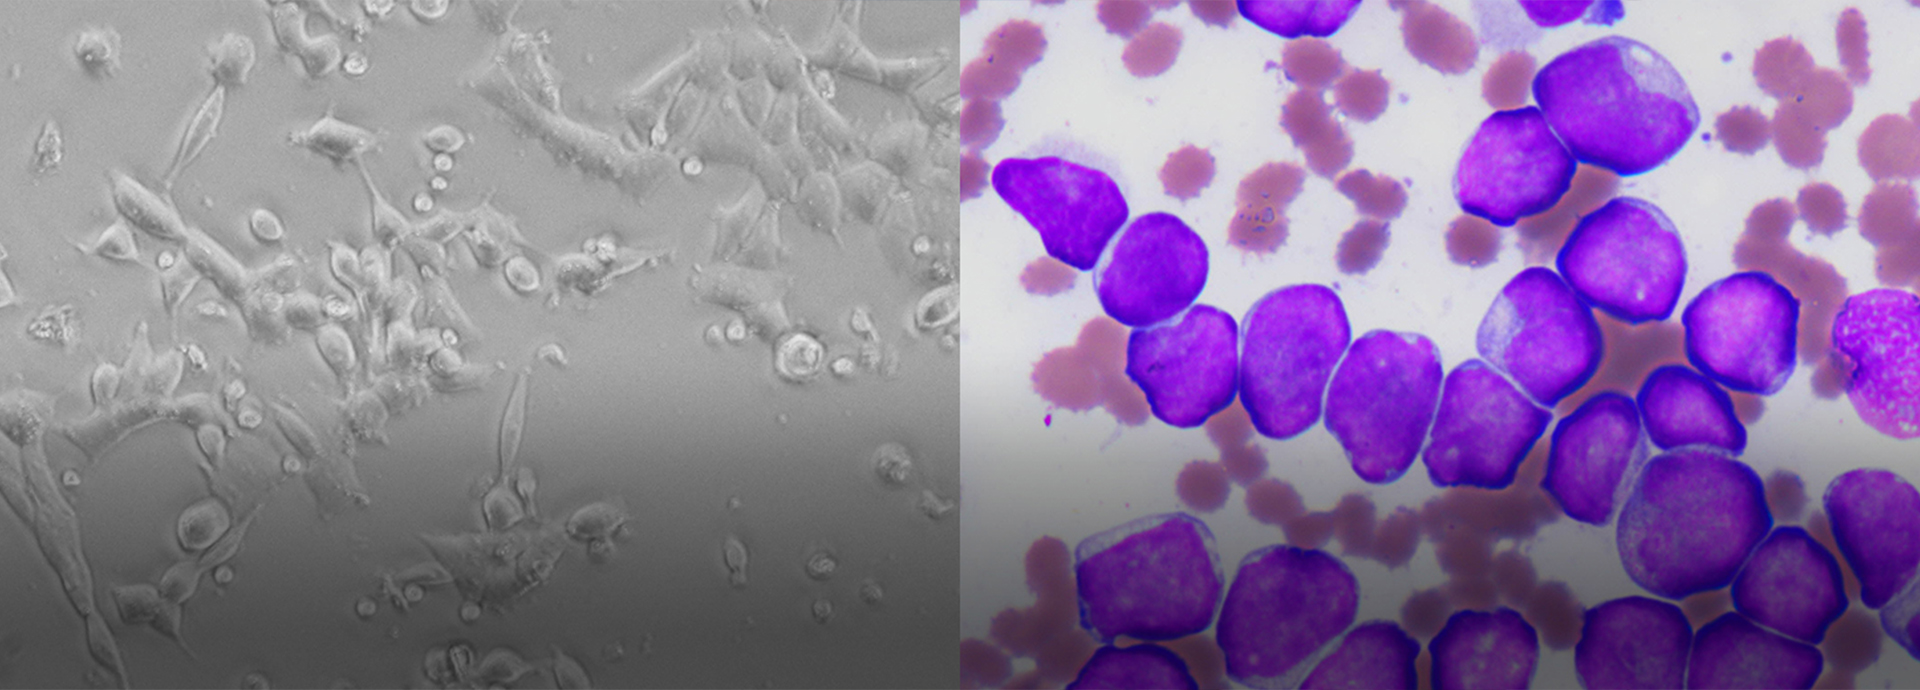 Cure blood cancer without transplantation by establishing new cell therapy